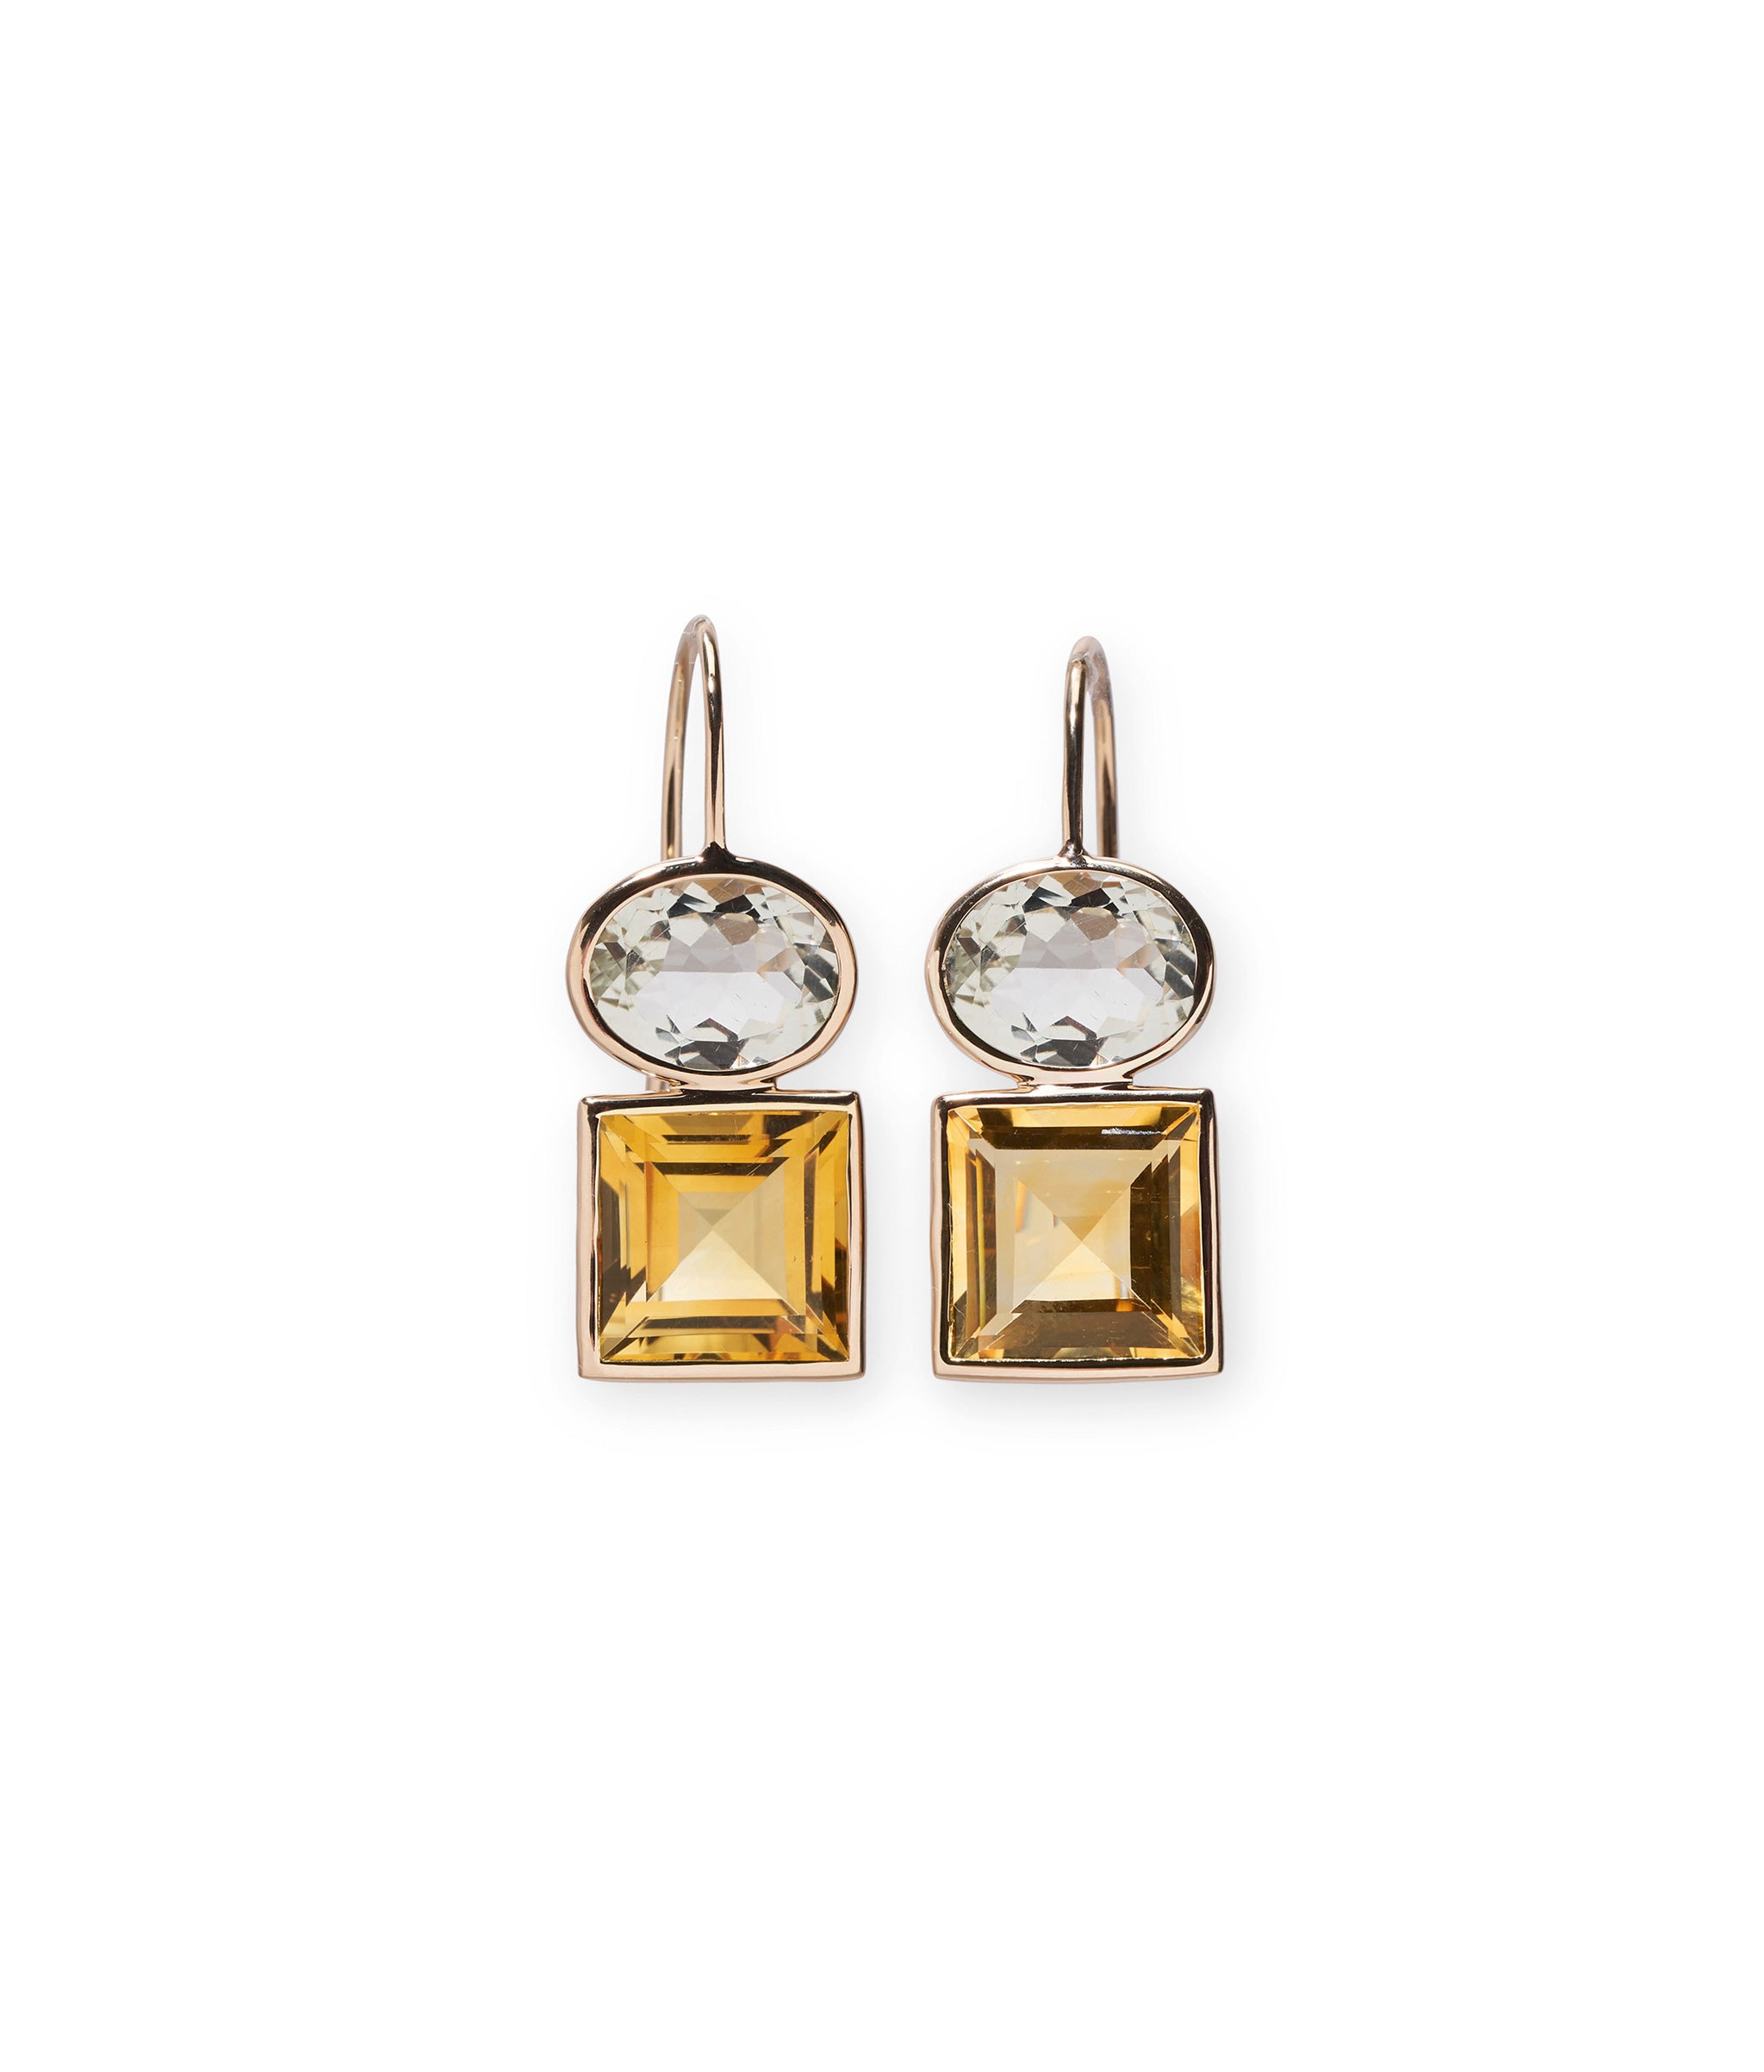 14k Duo Earrings Green Amethyst & Citrine. Fine gold earwires with faceted green amethyst oval and square citrine.